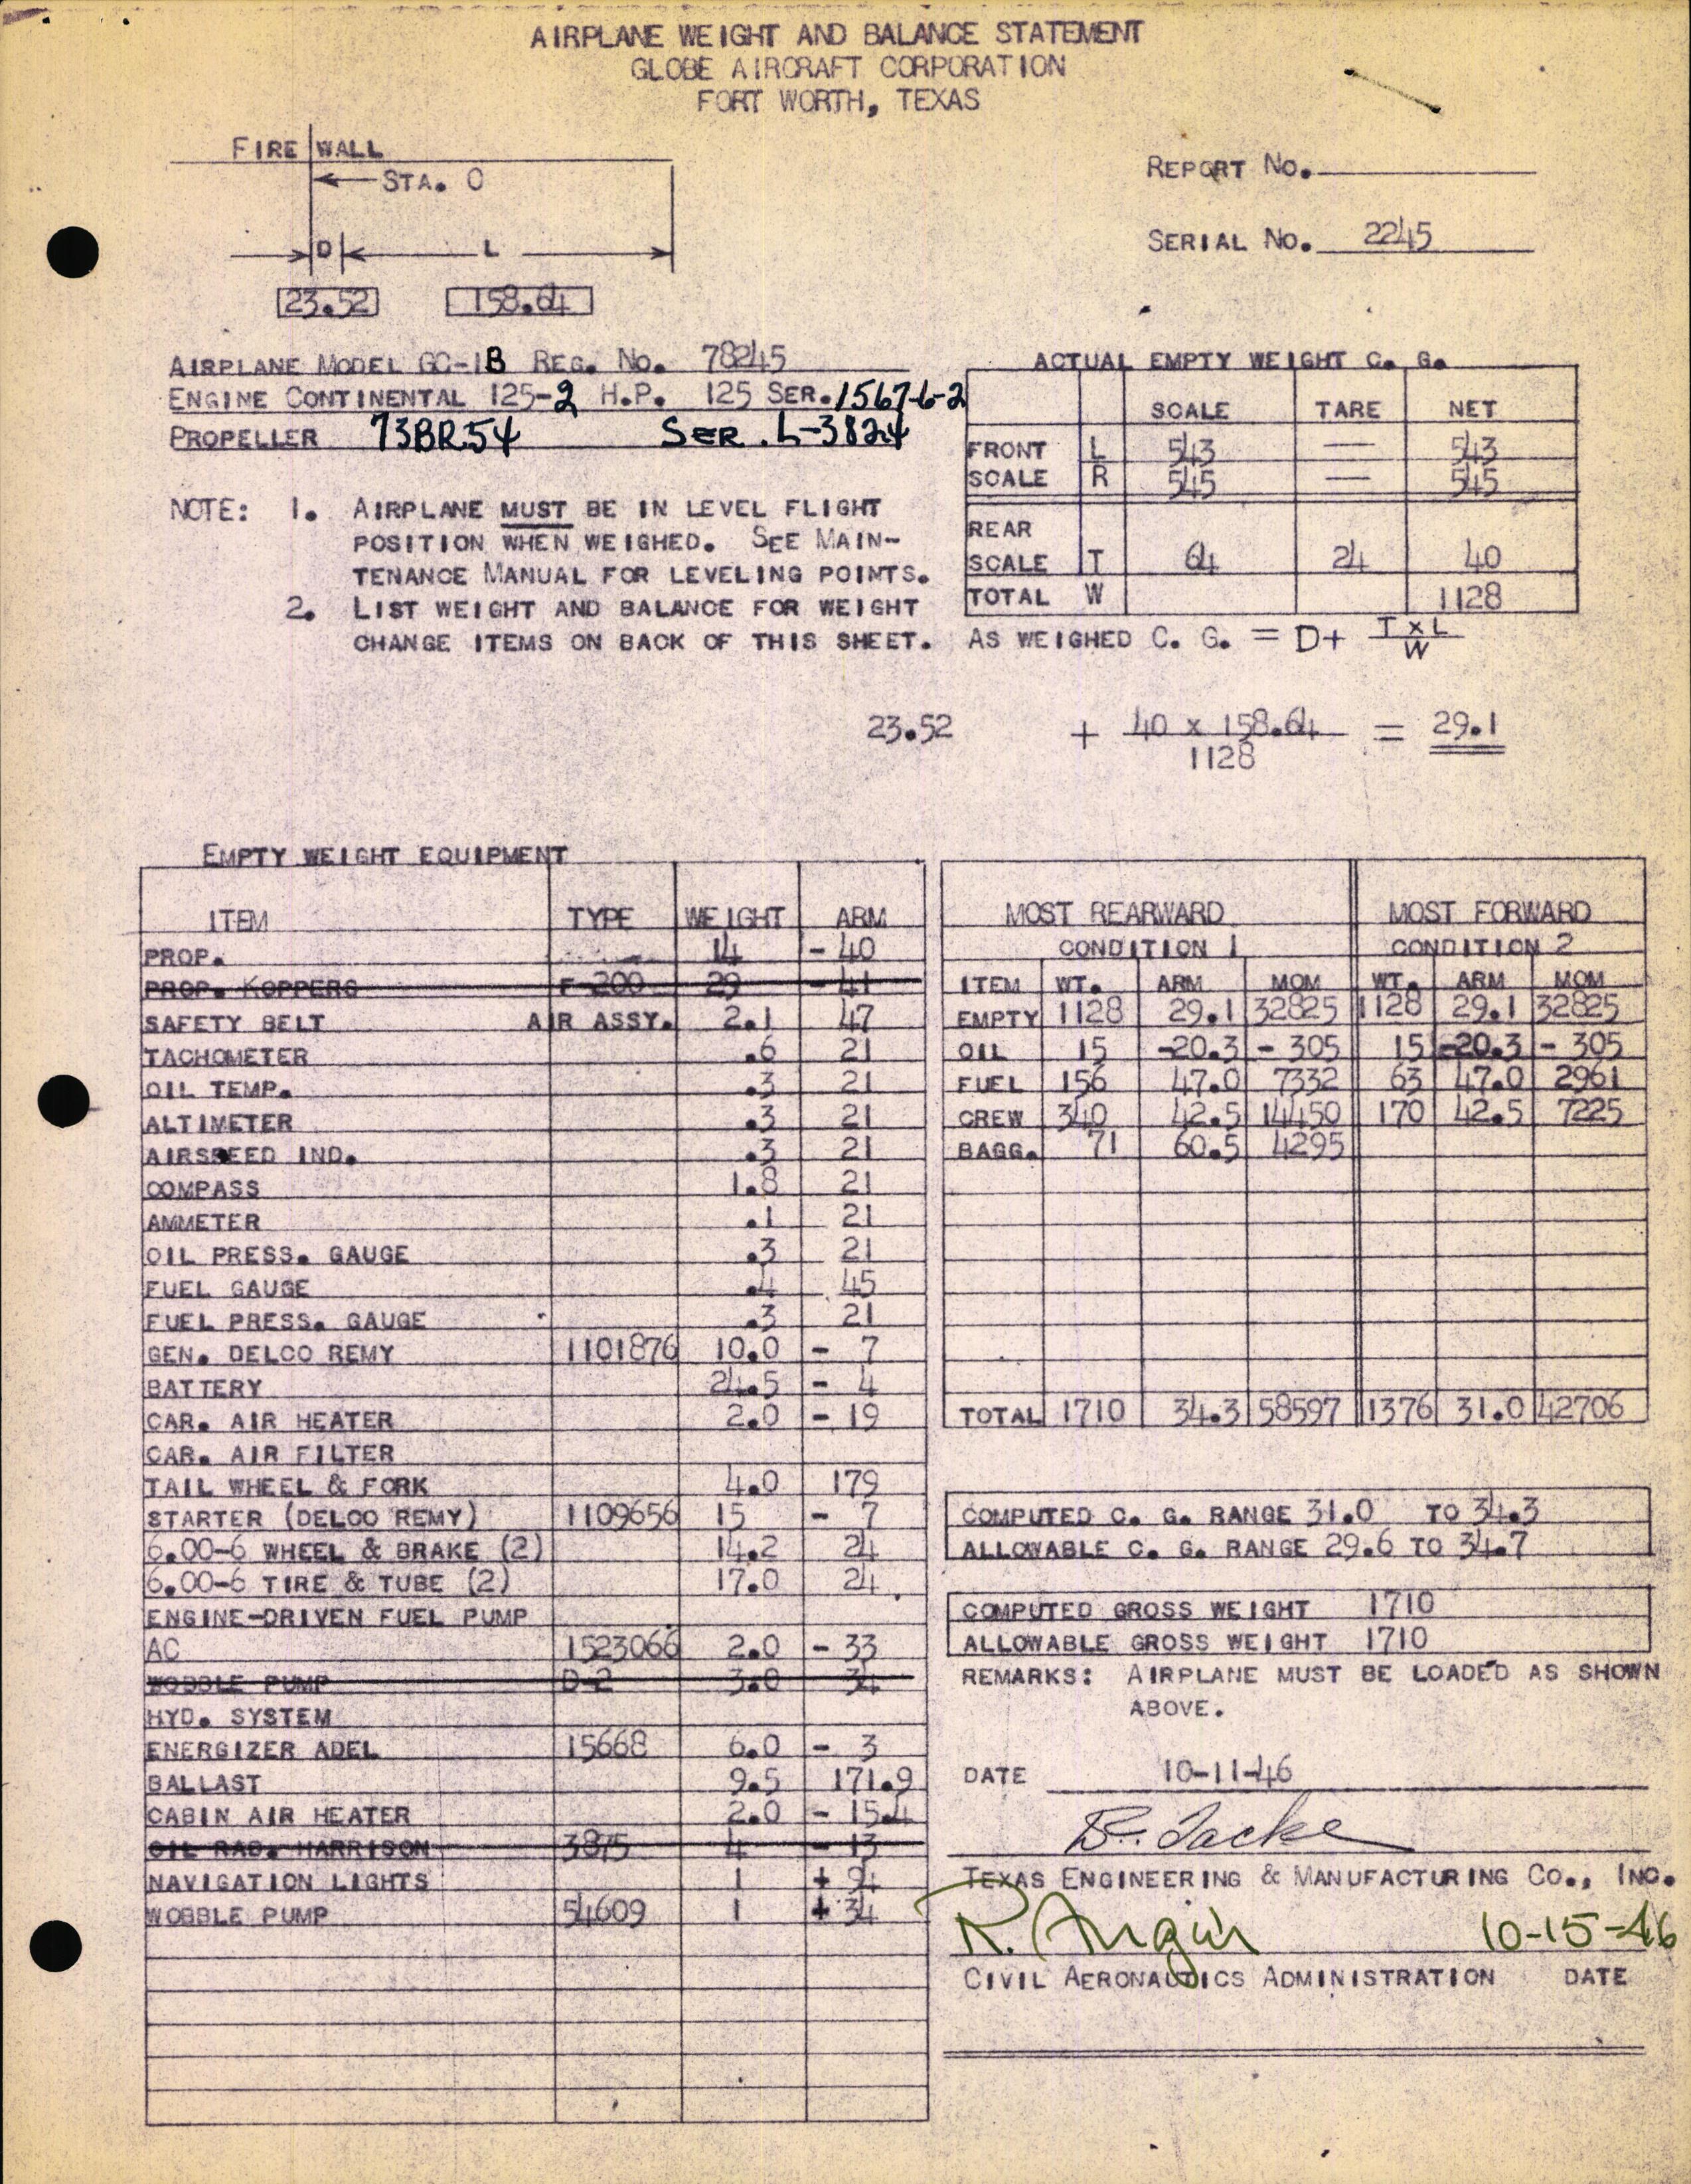 Sample page 1 from AirCorps Library document: Technical Information for Serial Number 2245